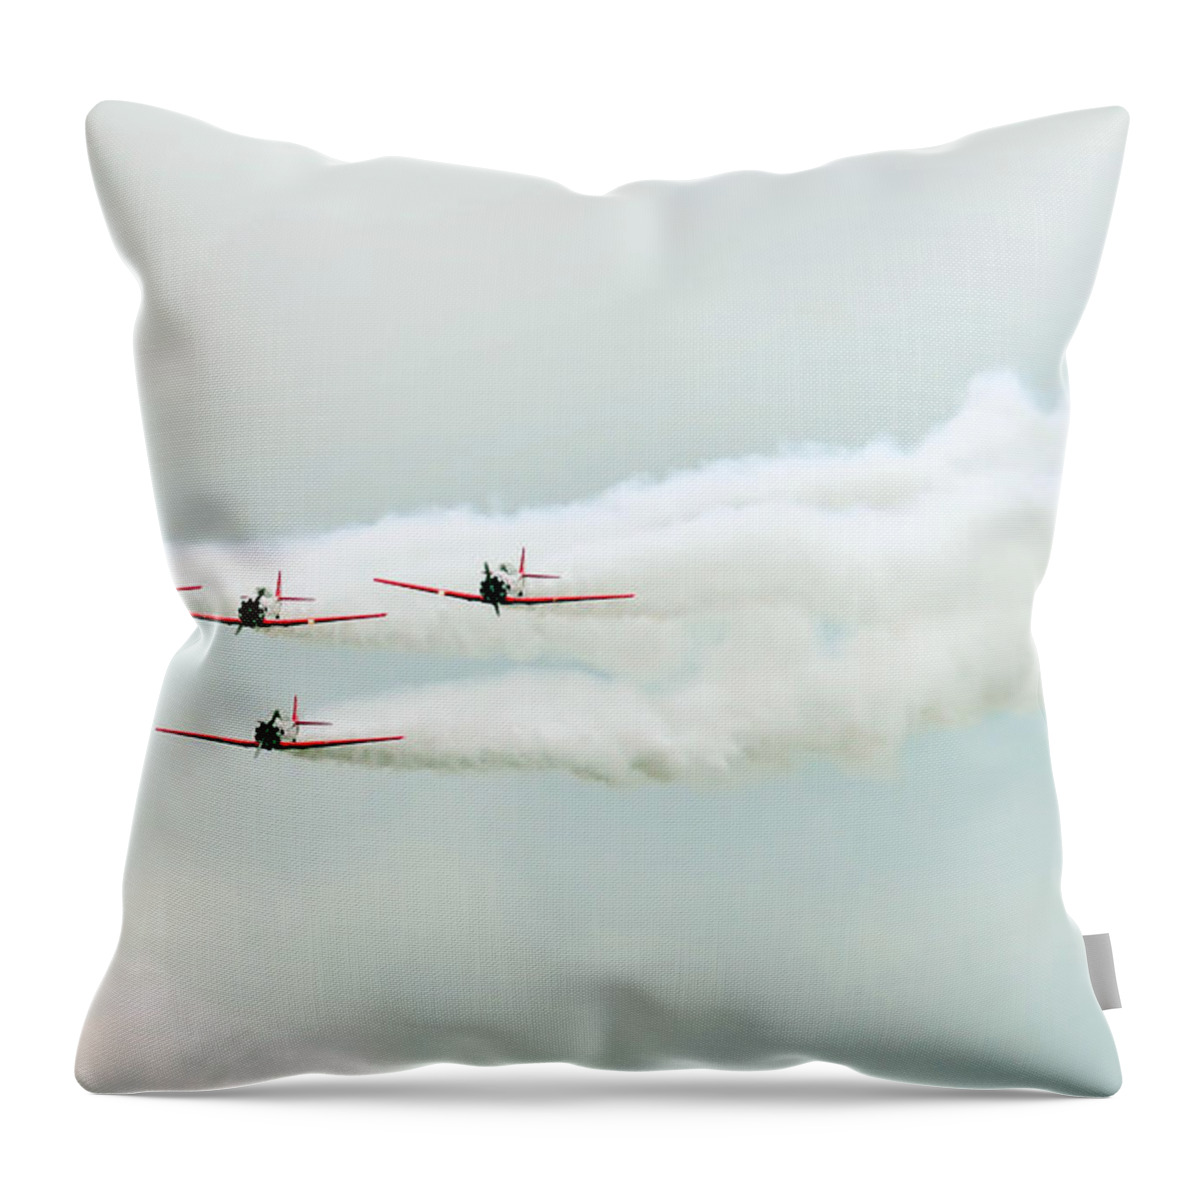 Accuracy Throw Pillow featuring the photograph Airplanes At Airshow #1 by Alex Grichenko